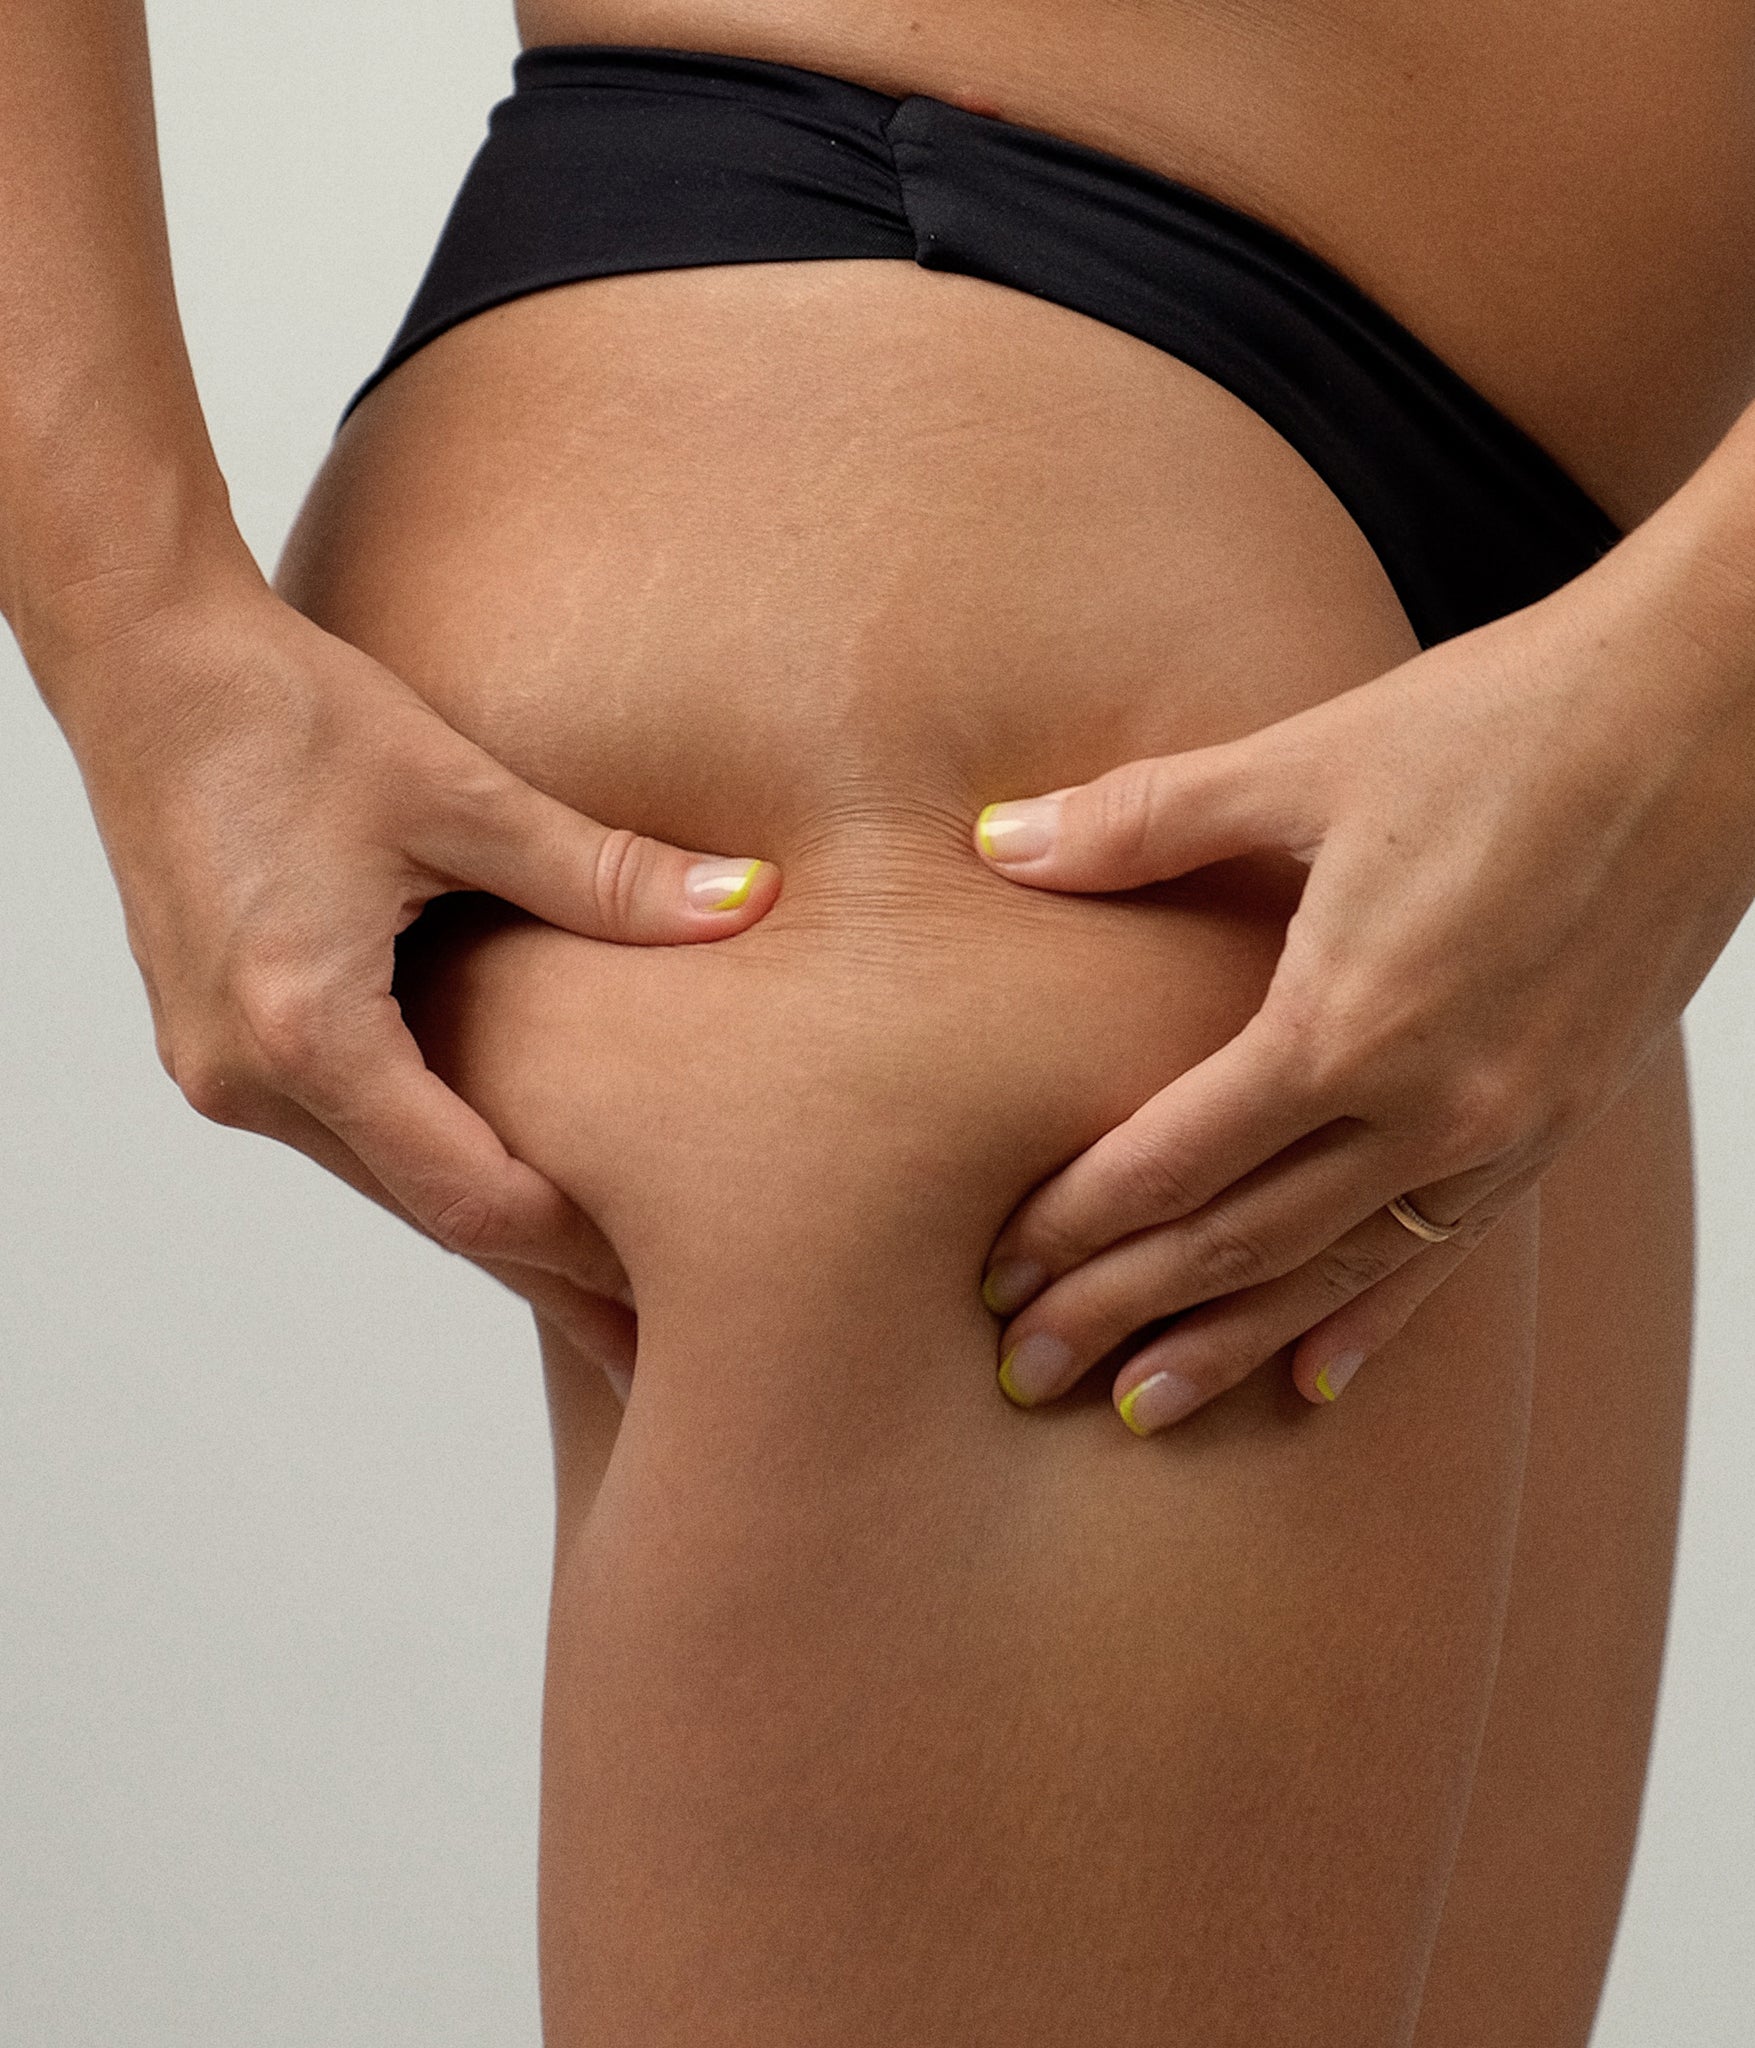 What are the different types of cellulite?